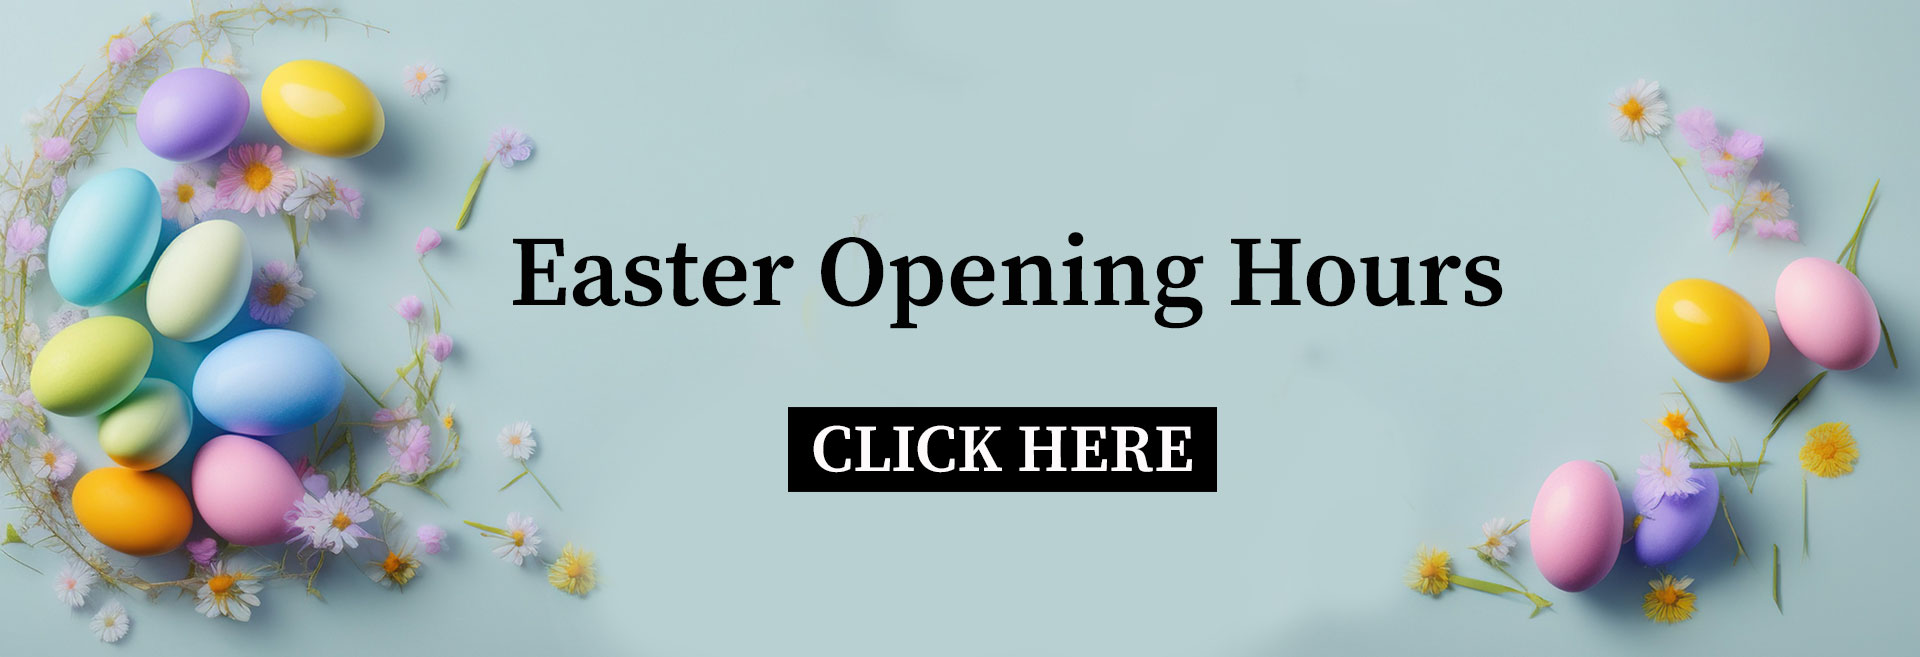 Easter Opening Hours banner